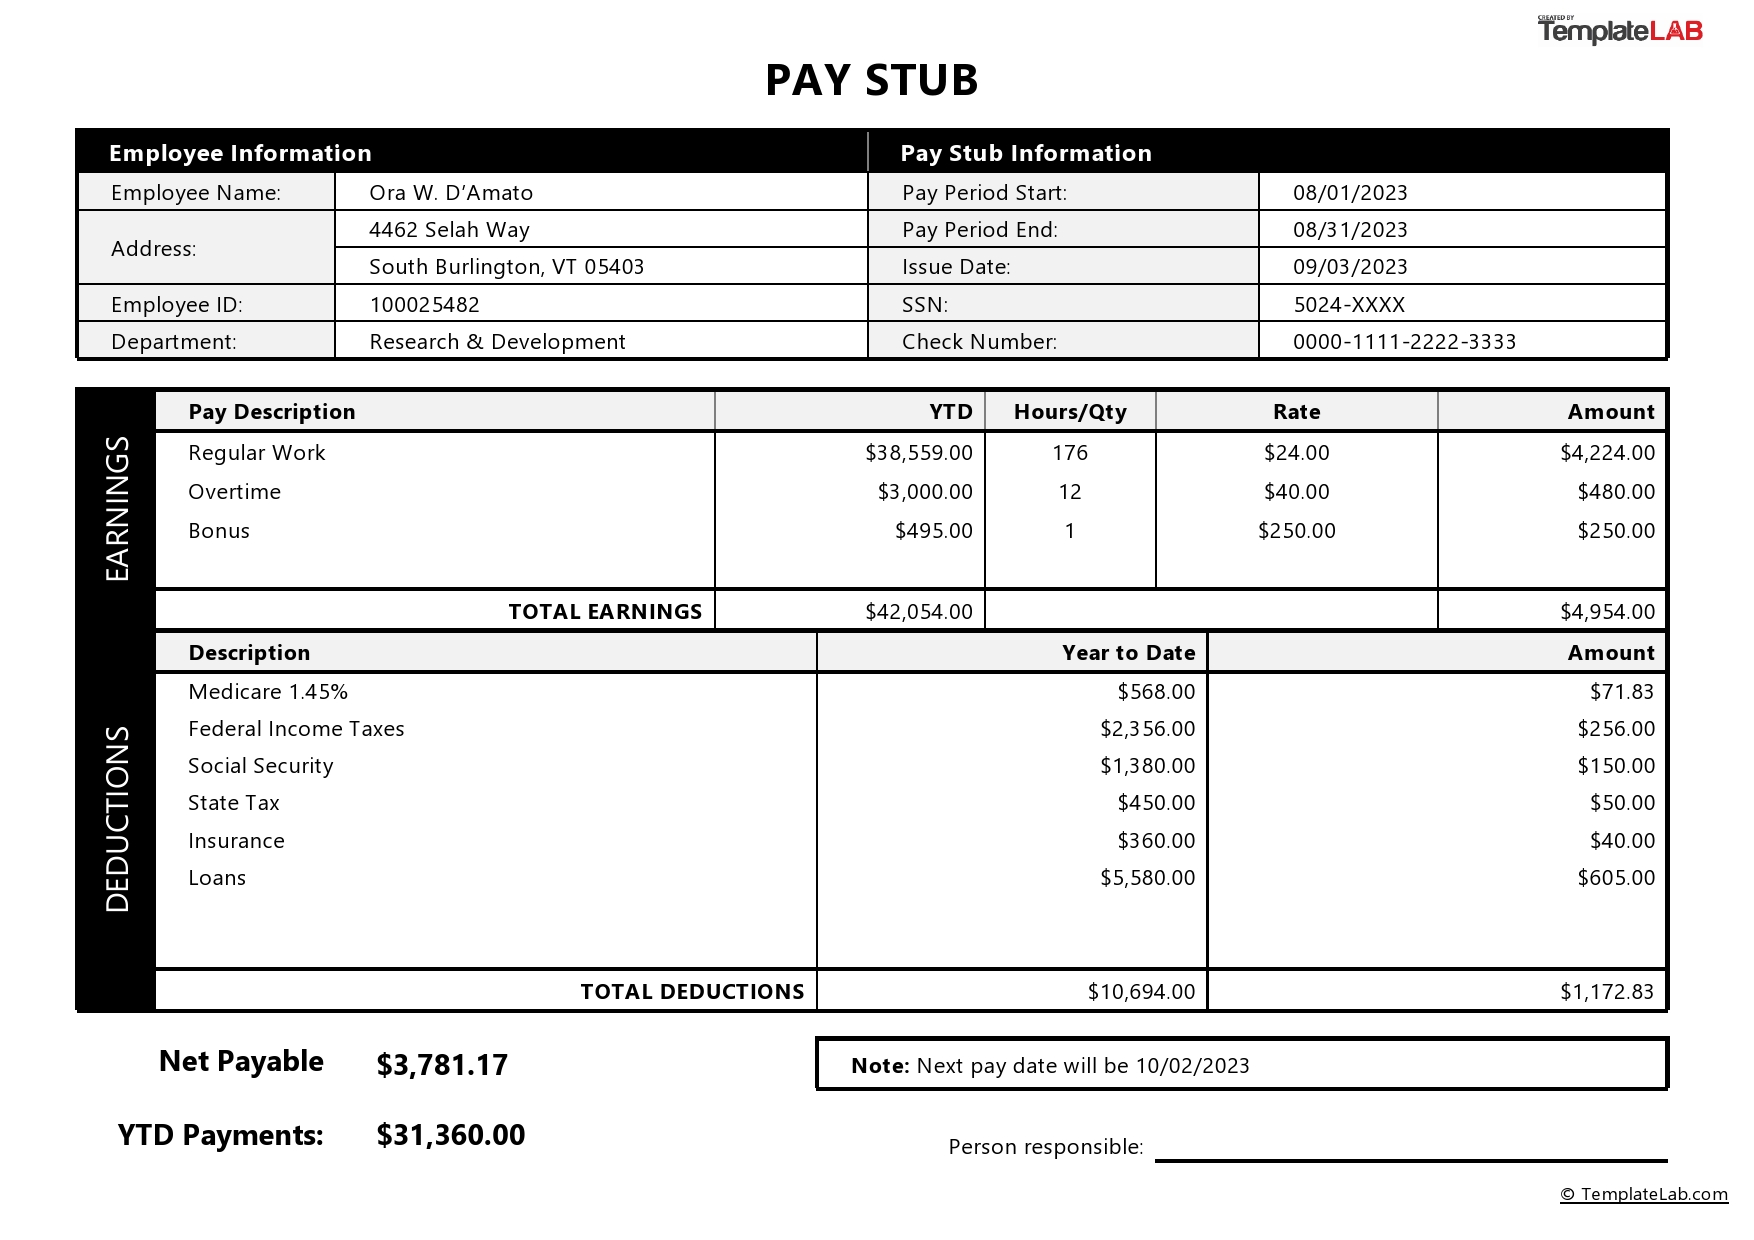 pay stub excel template